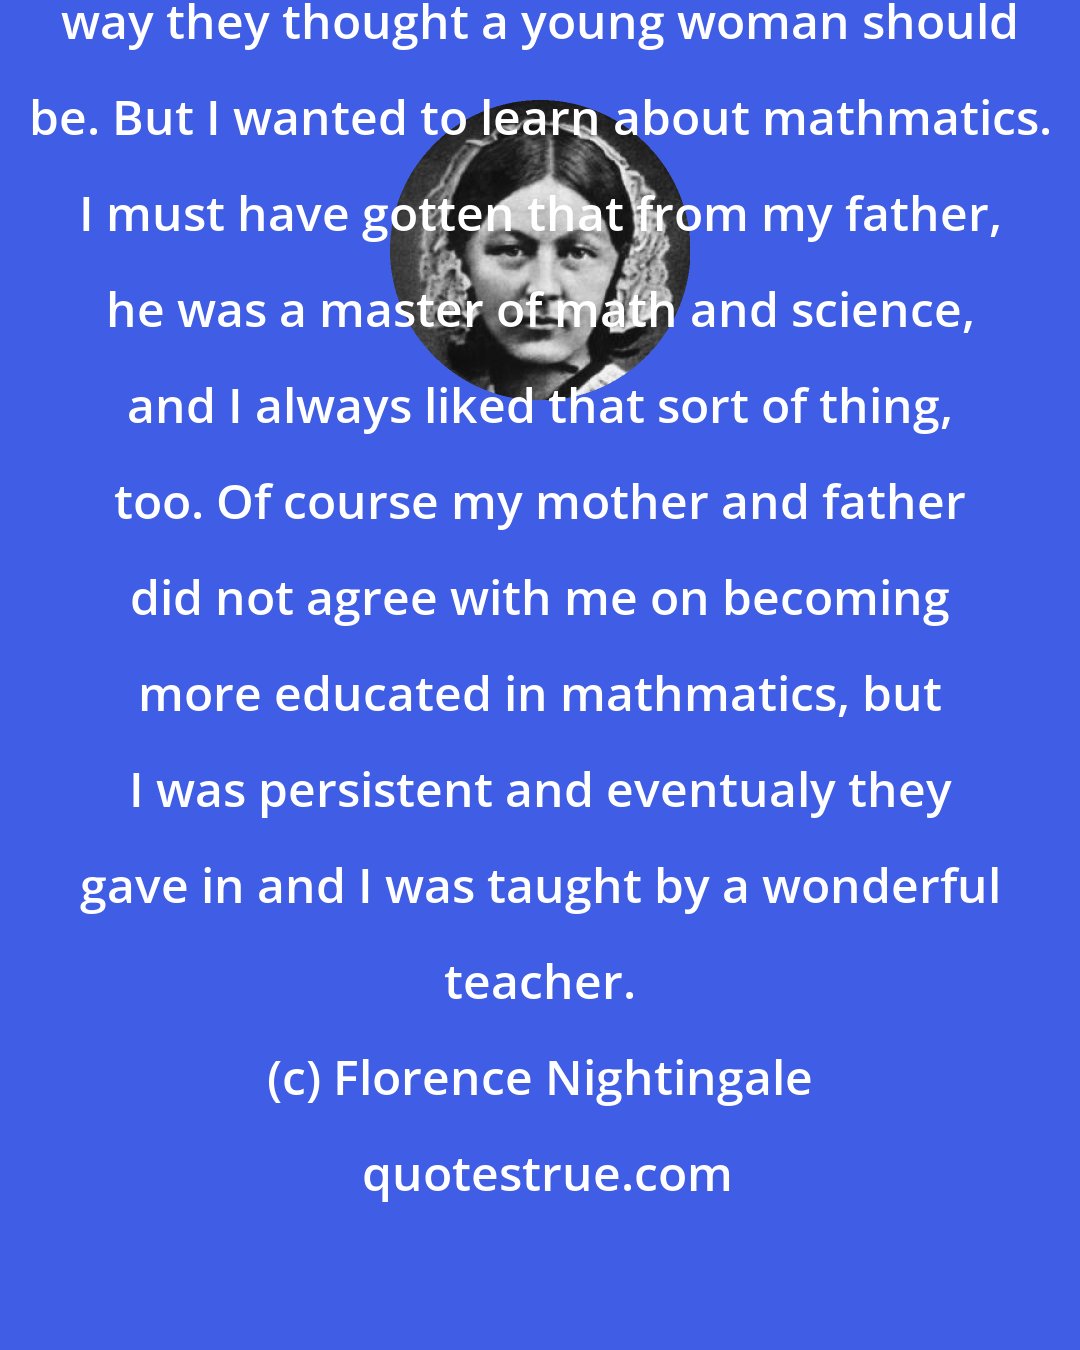 Florence Nightingale: My family tried to educate me in the way they thought a young woman should be. But I wanted to learn about mathmatics. I must have gotten that from my father, he was a master of math and science, and I always liked that sort of thing, too. Of course my mother and father did not agree with me on becoming more educated in mathmatics, but I was persistent and eventualy they gave in and I was taught by a wonderful teacher.